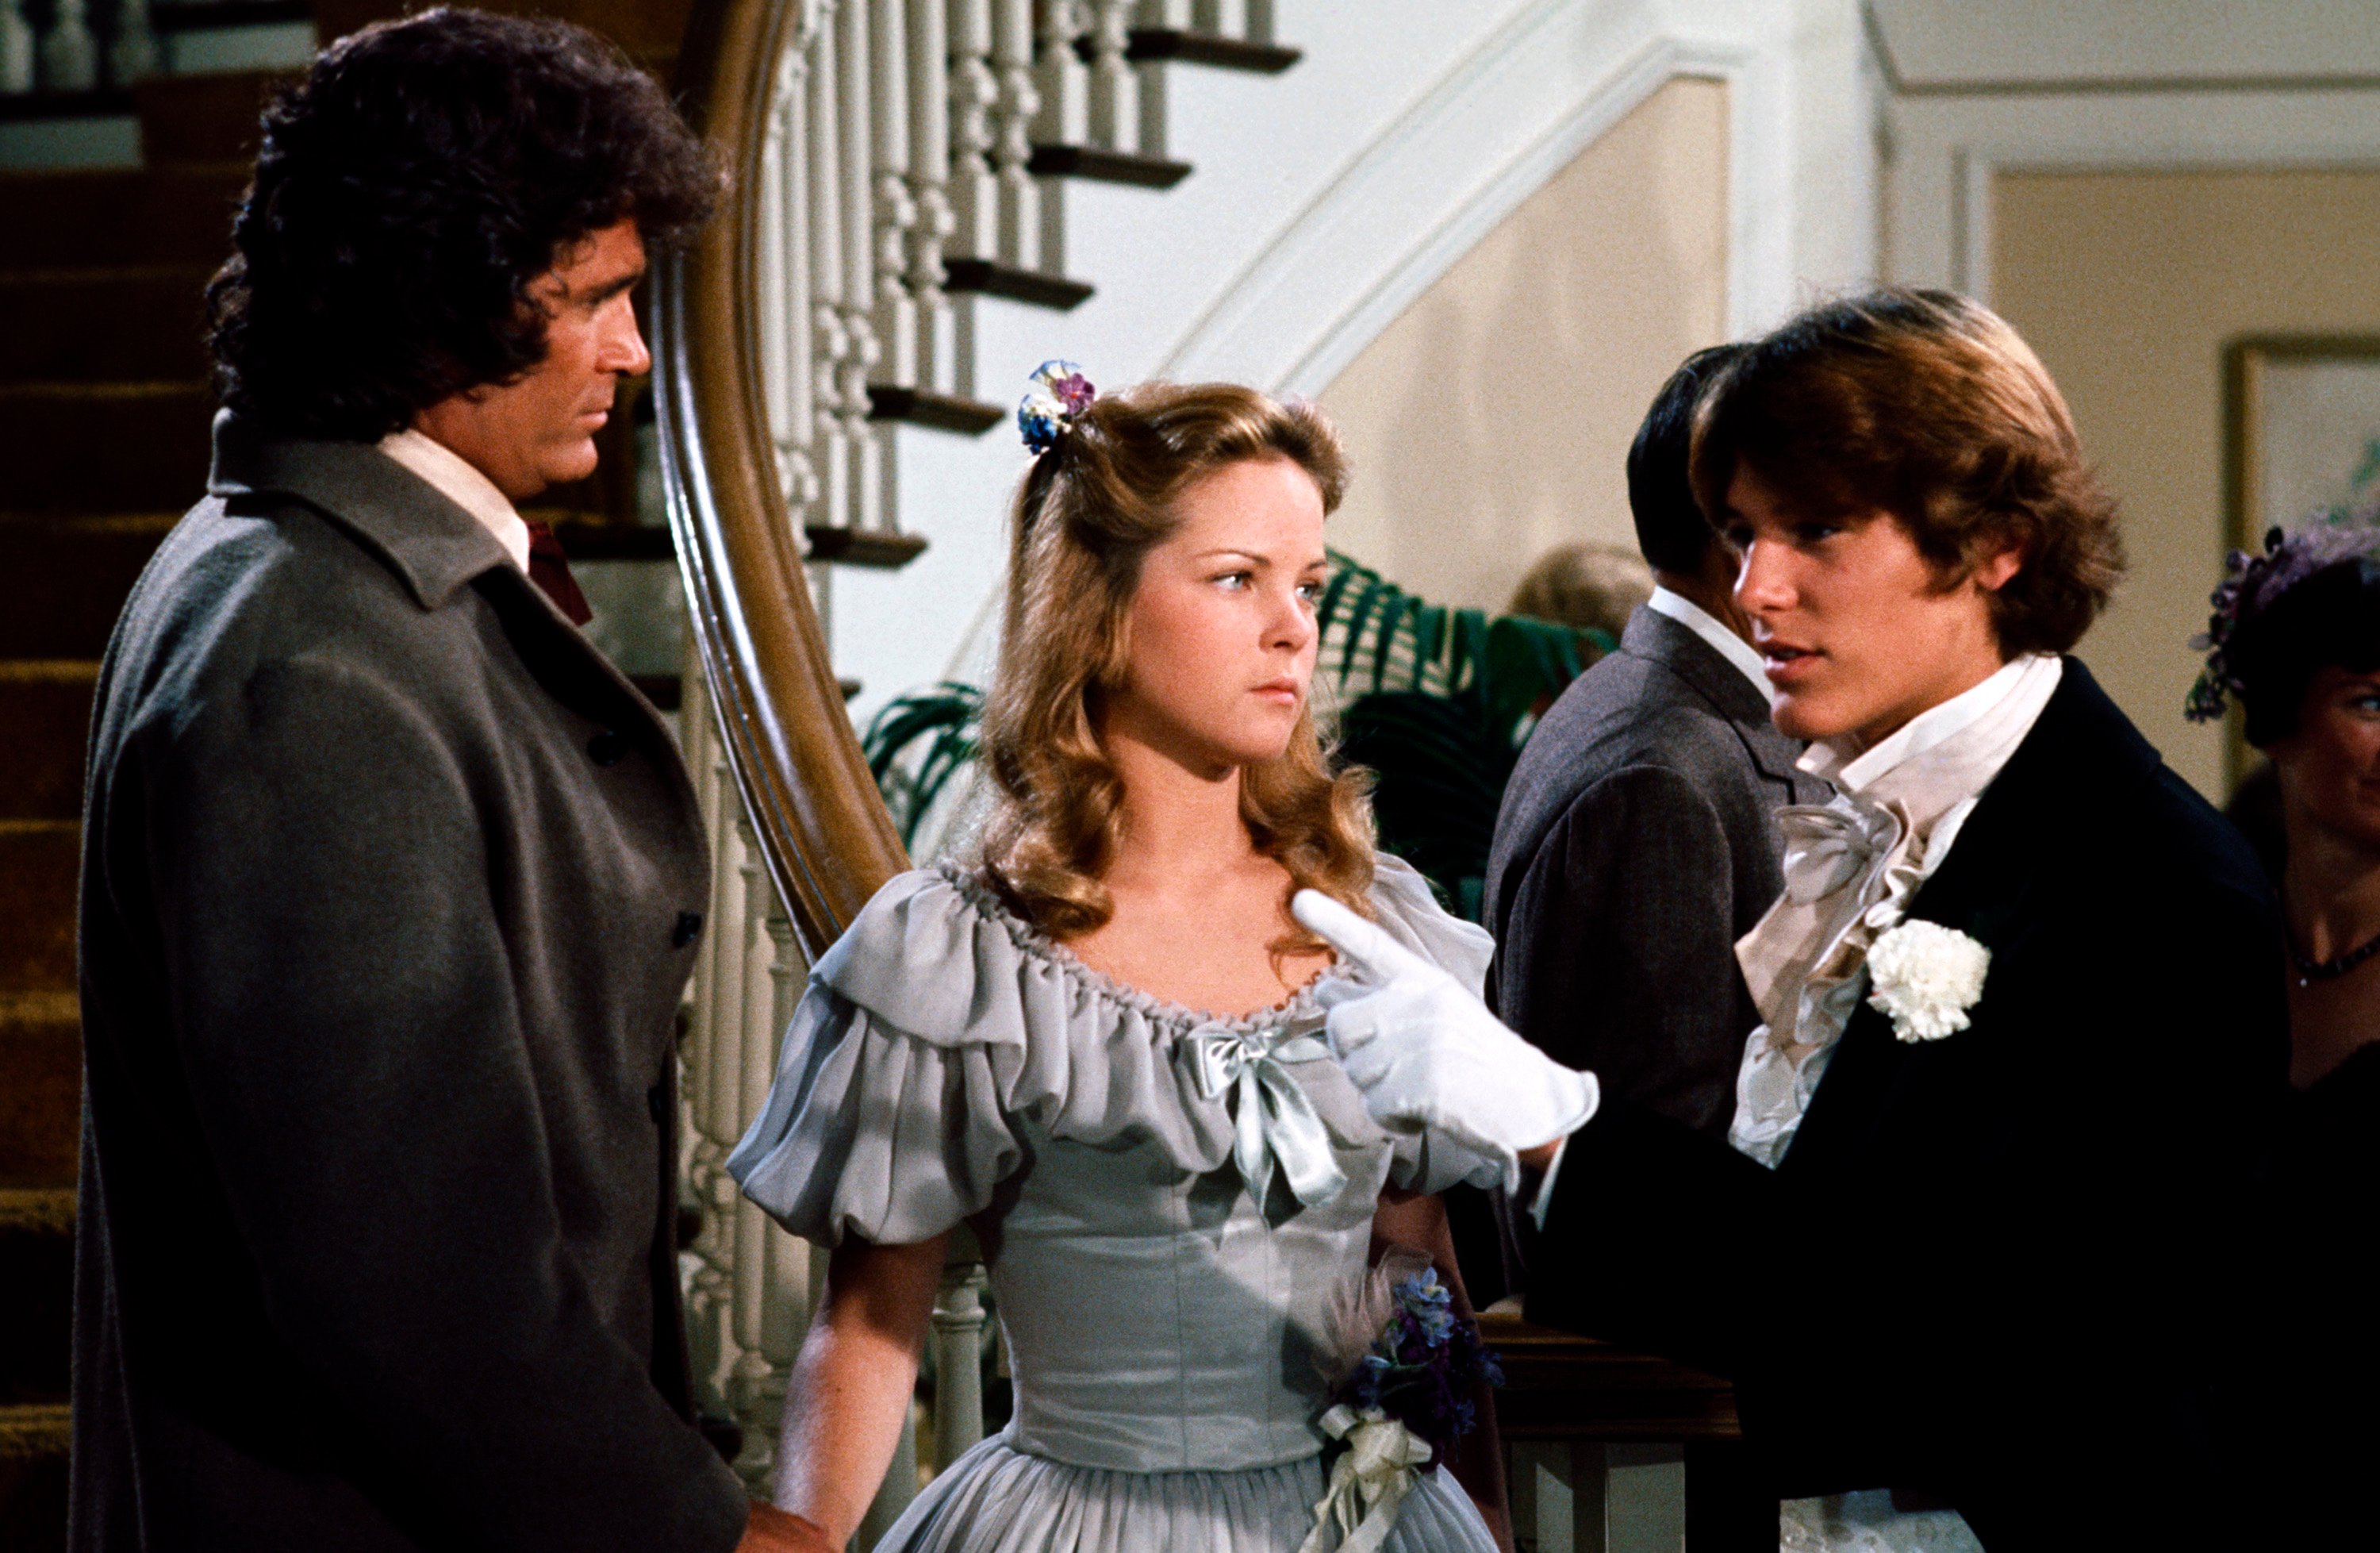 Michael Landon, Melissa Sue Anderson, and Radames Pera of 'Little House on the Prairie' 